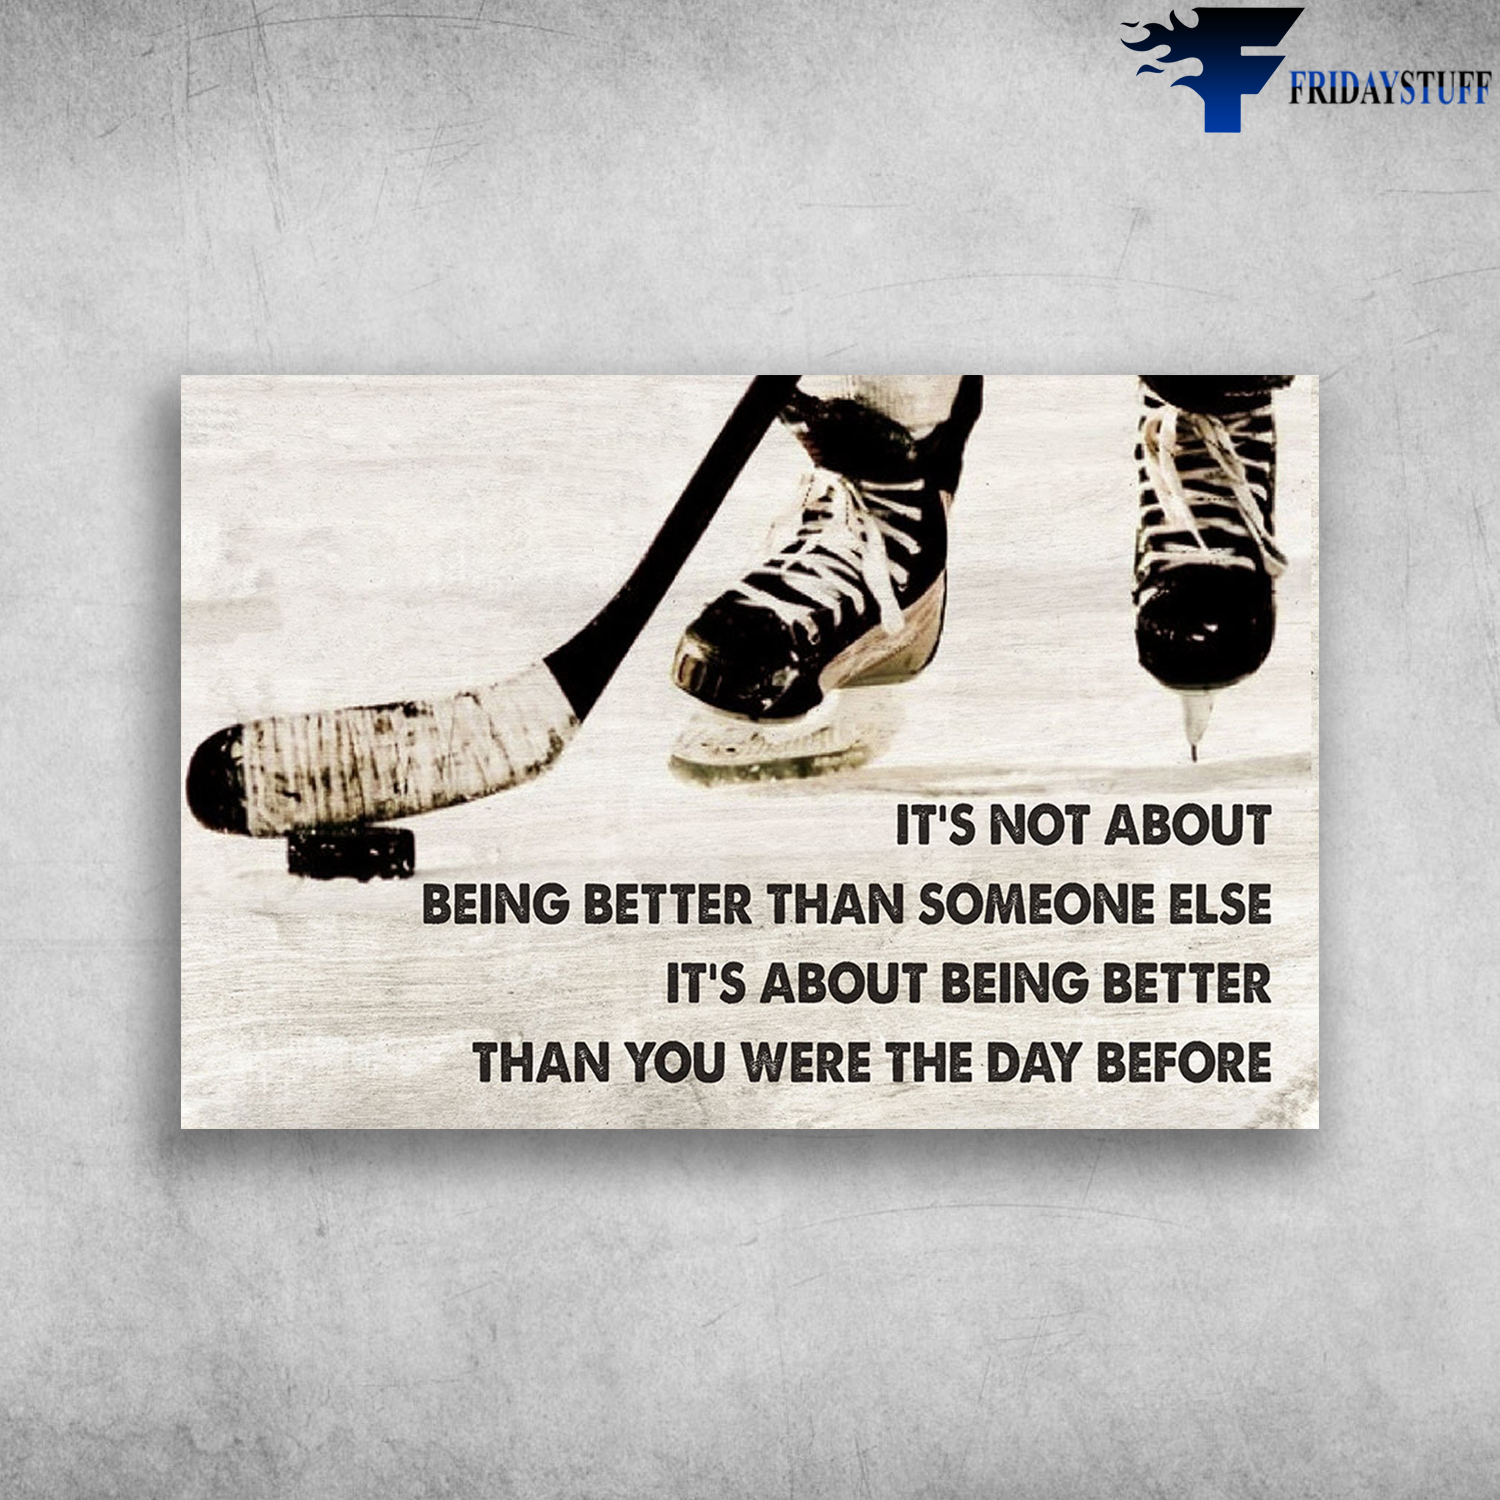 Hockey Player - It's Not About Being Better Than Someone Else, It's About Being Better Than You Were The Day Before